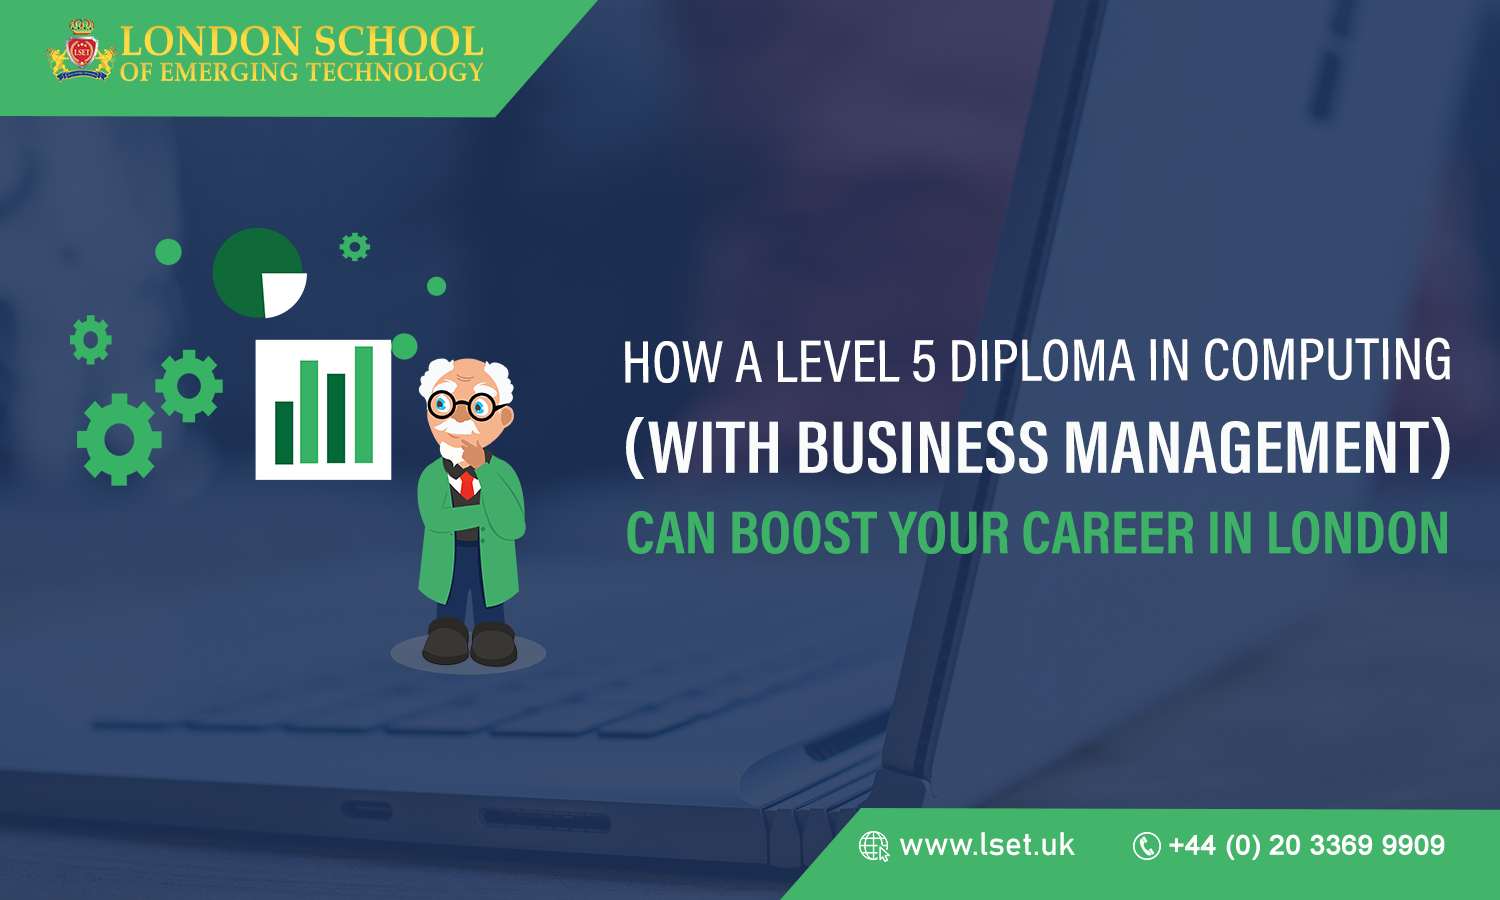 How a Level 5 Diploma in Computing (with Business Management) Can Boost Your Career in London 4.48.20 PM